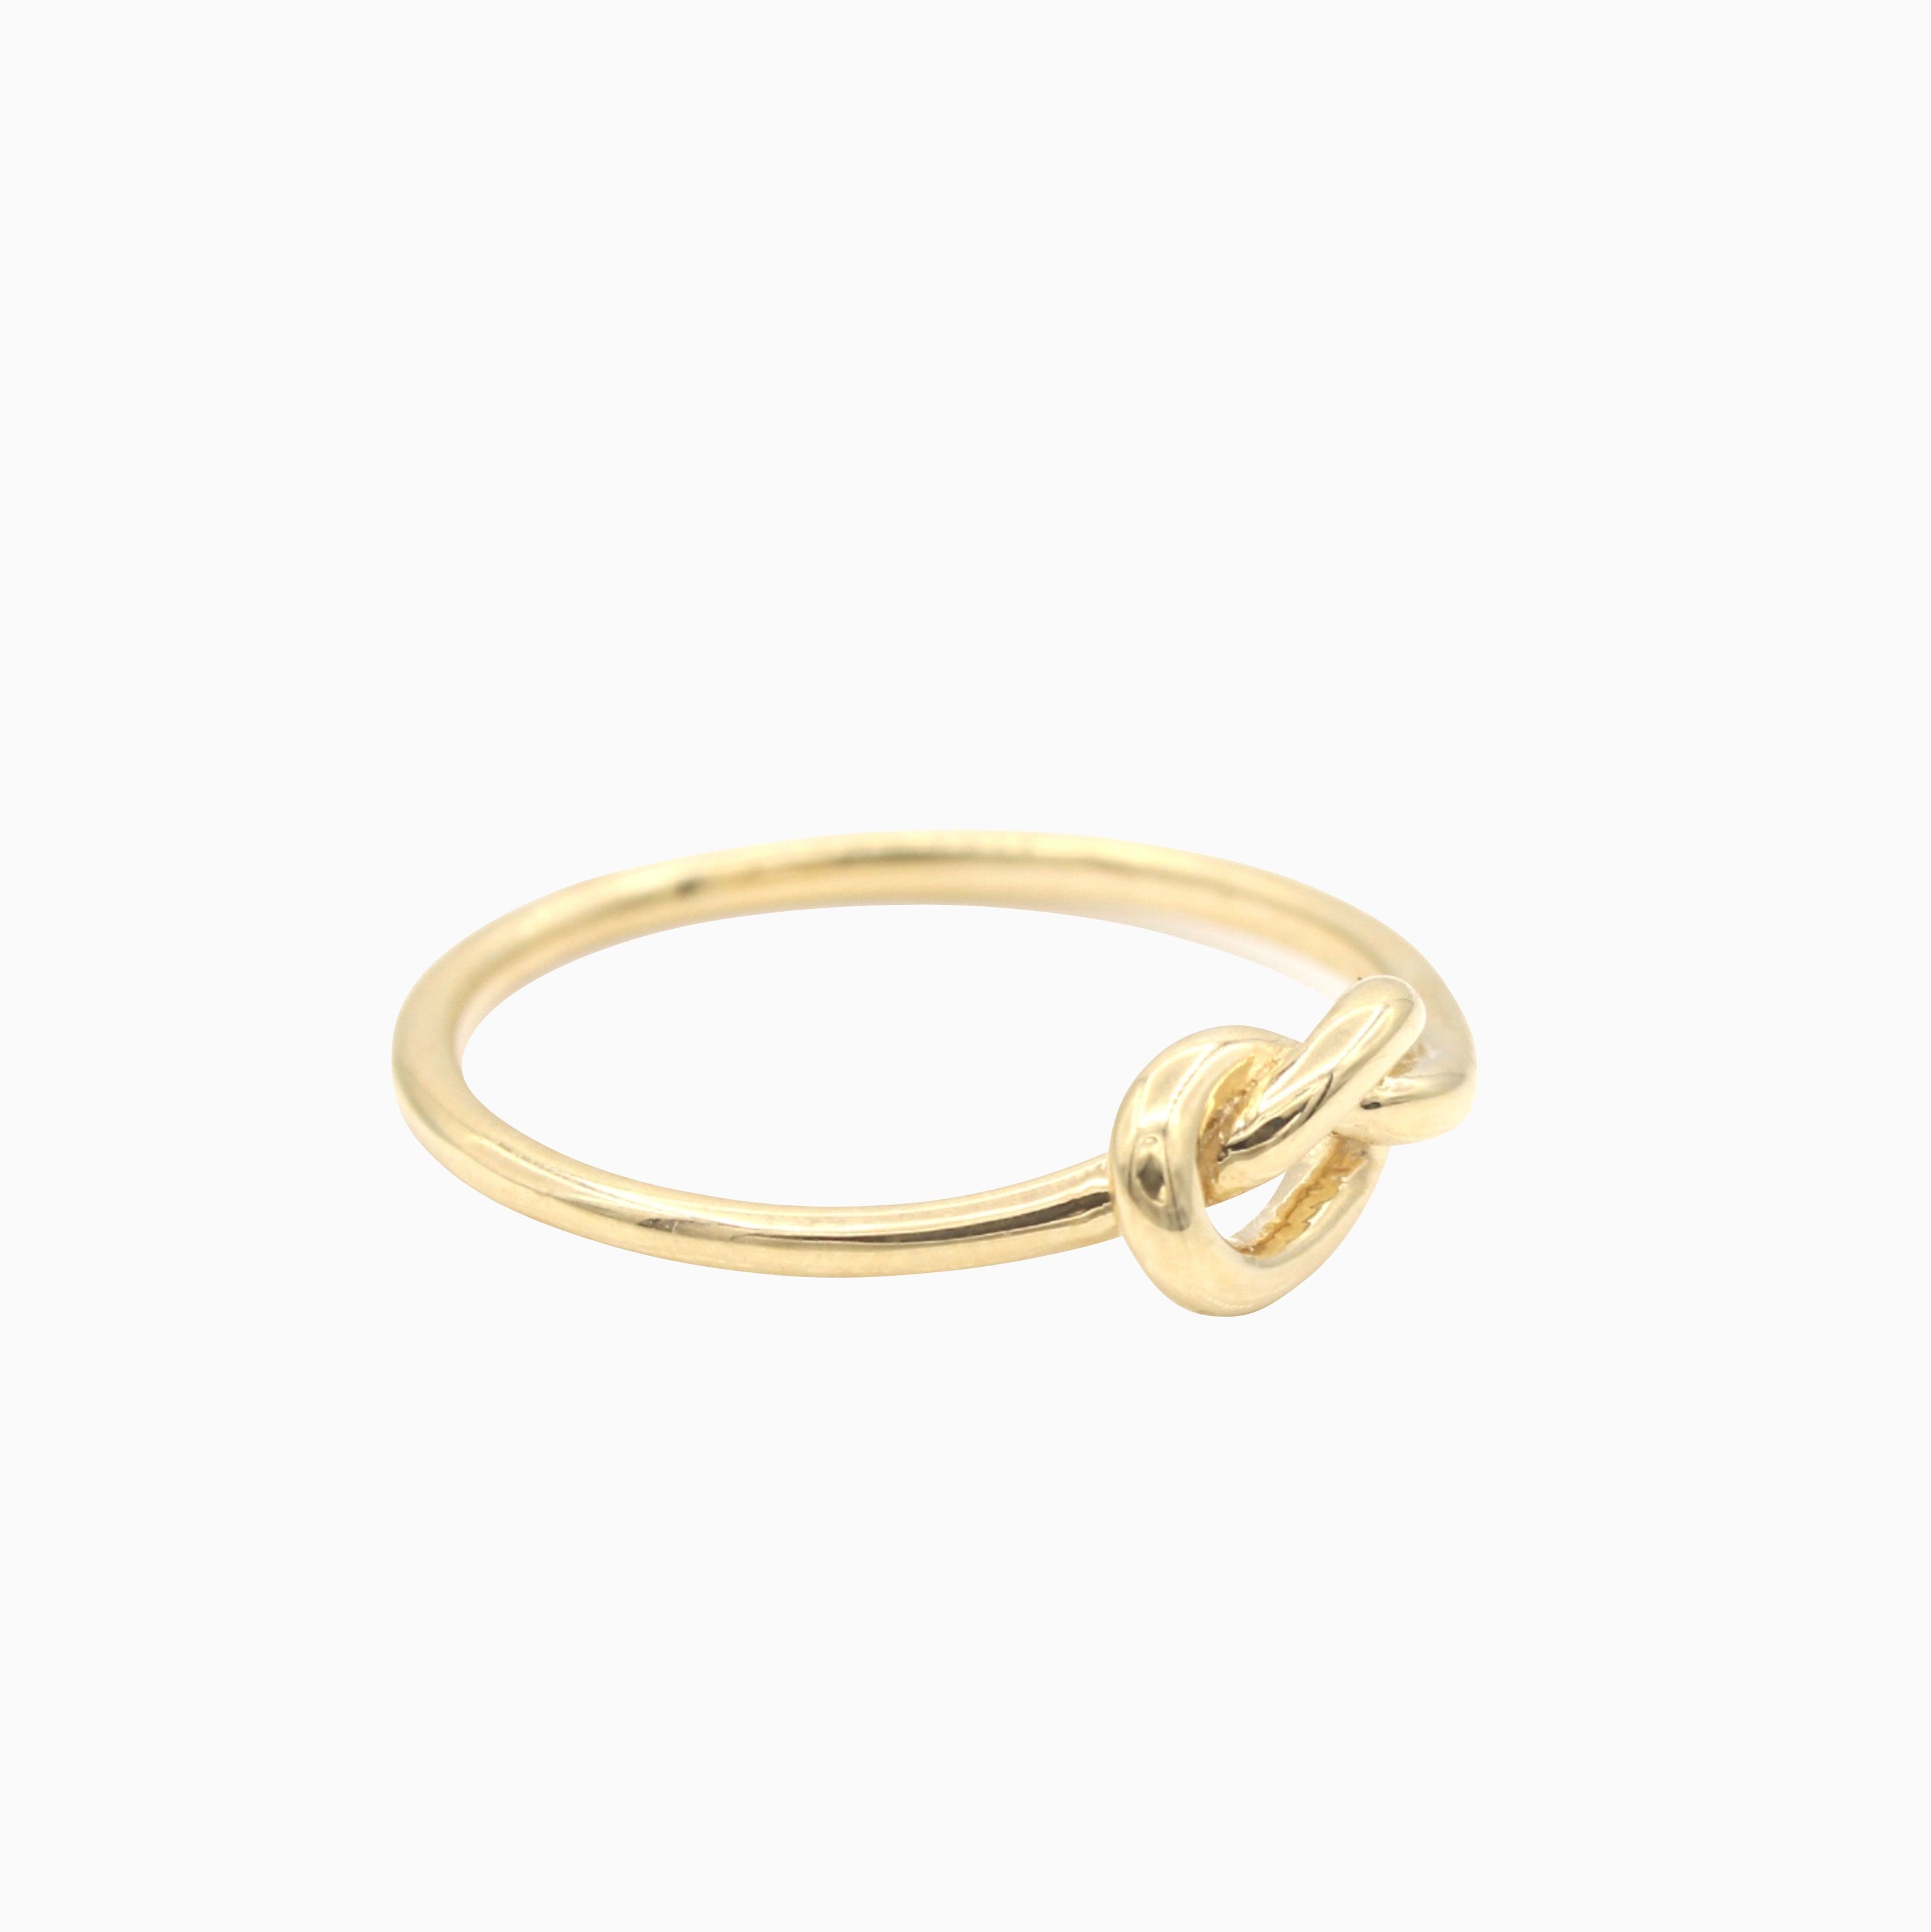 14k Yellow Gold Forget Me Knot Ring, side view from left with a glimpse of the knot design